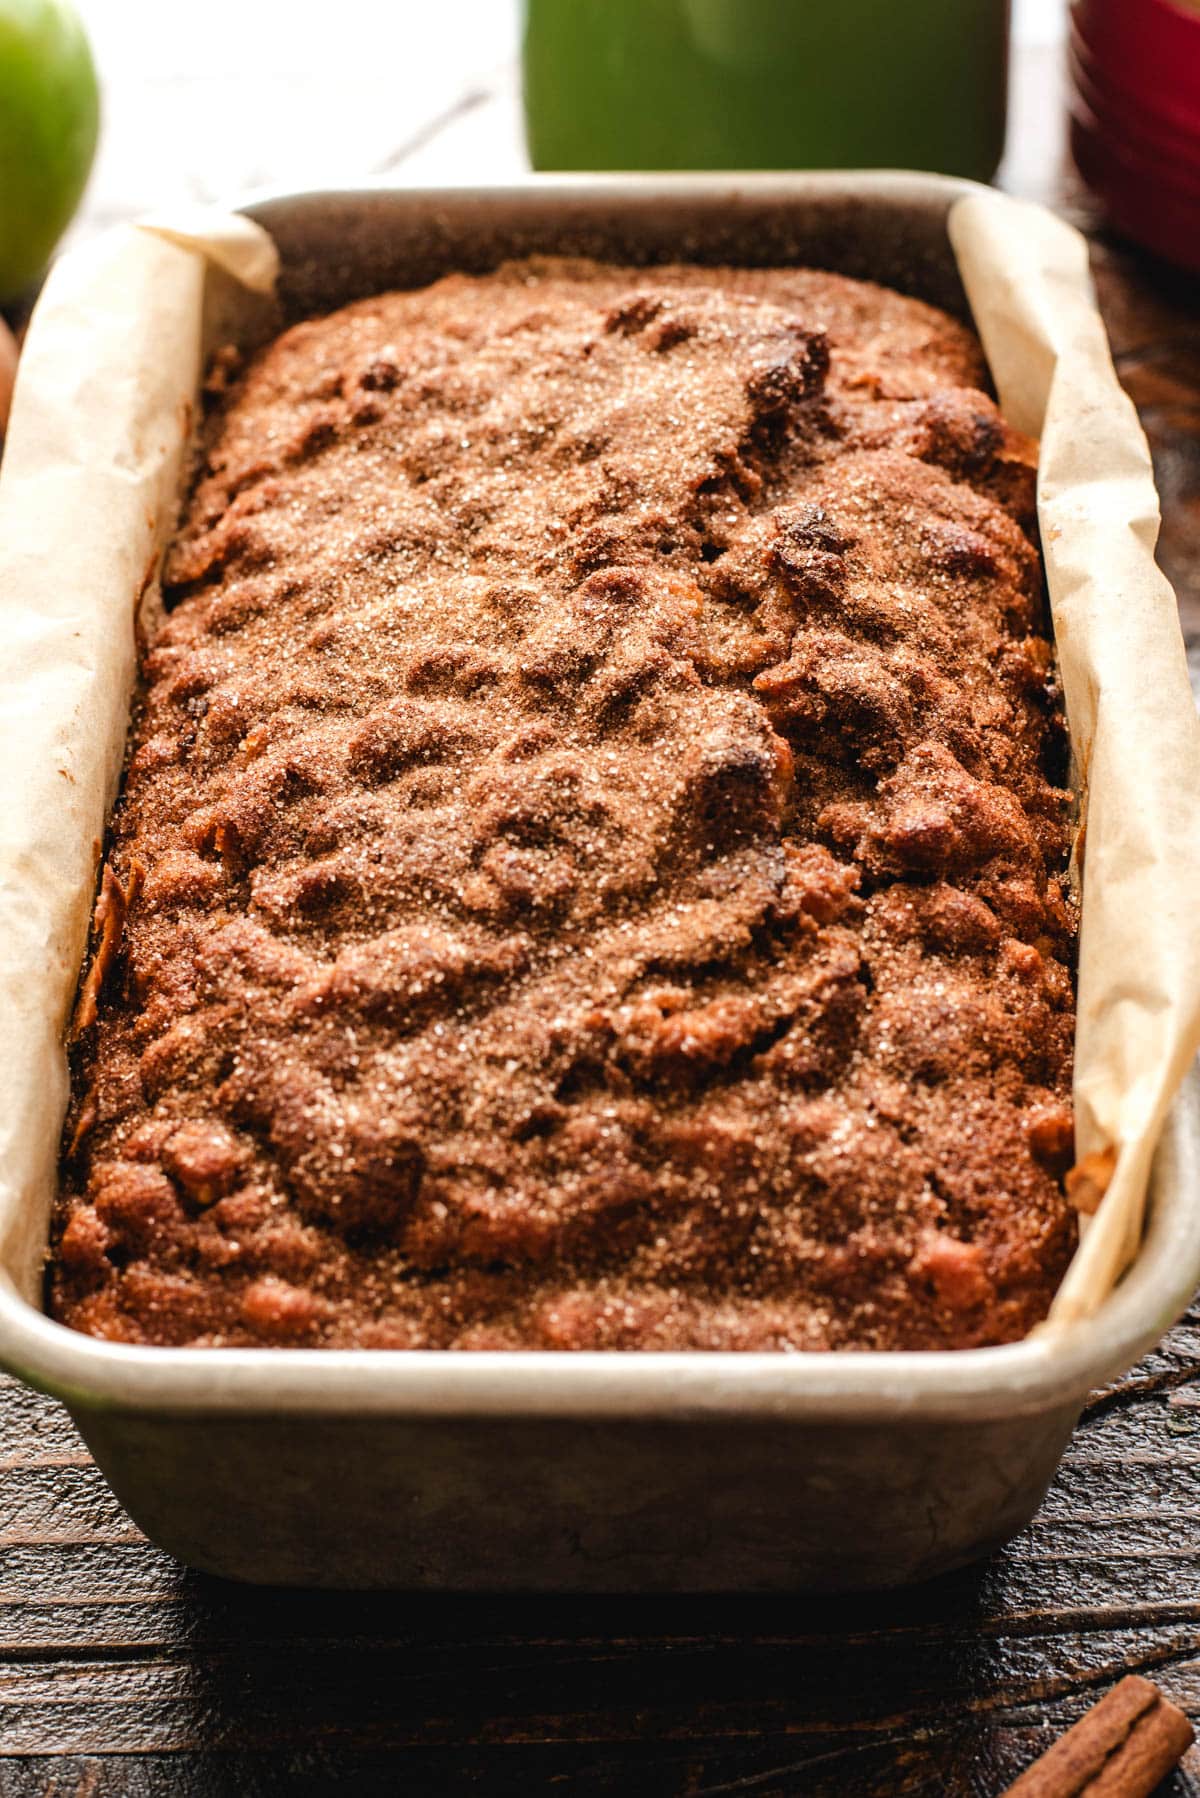 Cinnamon-sprinkled apple bread in a large loaf pan lined with parchment paper.